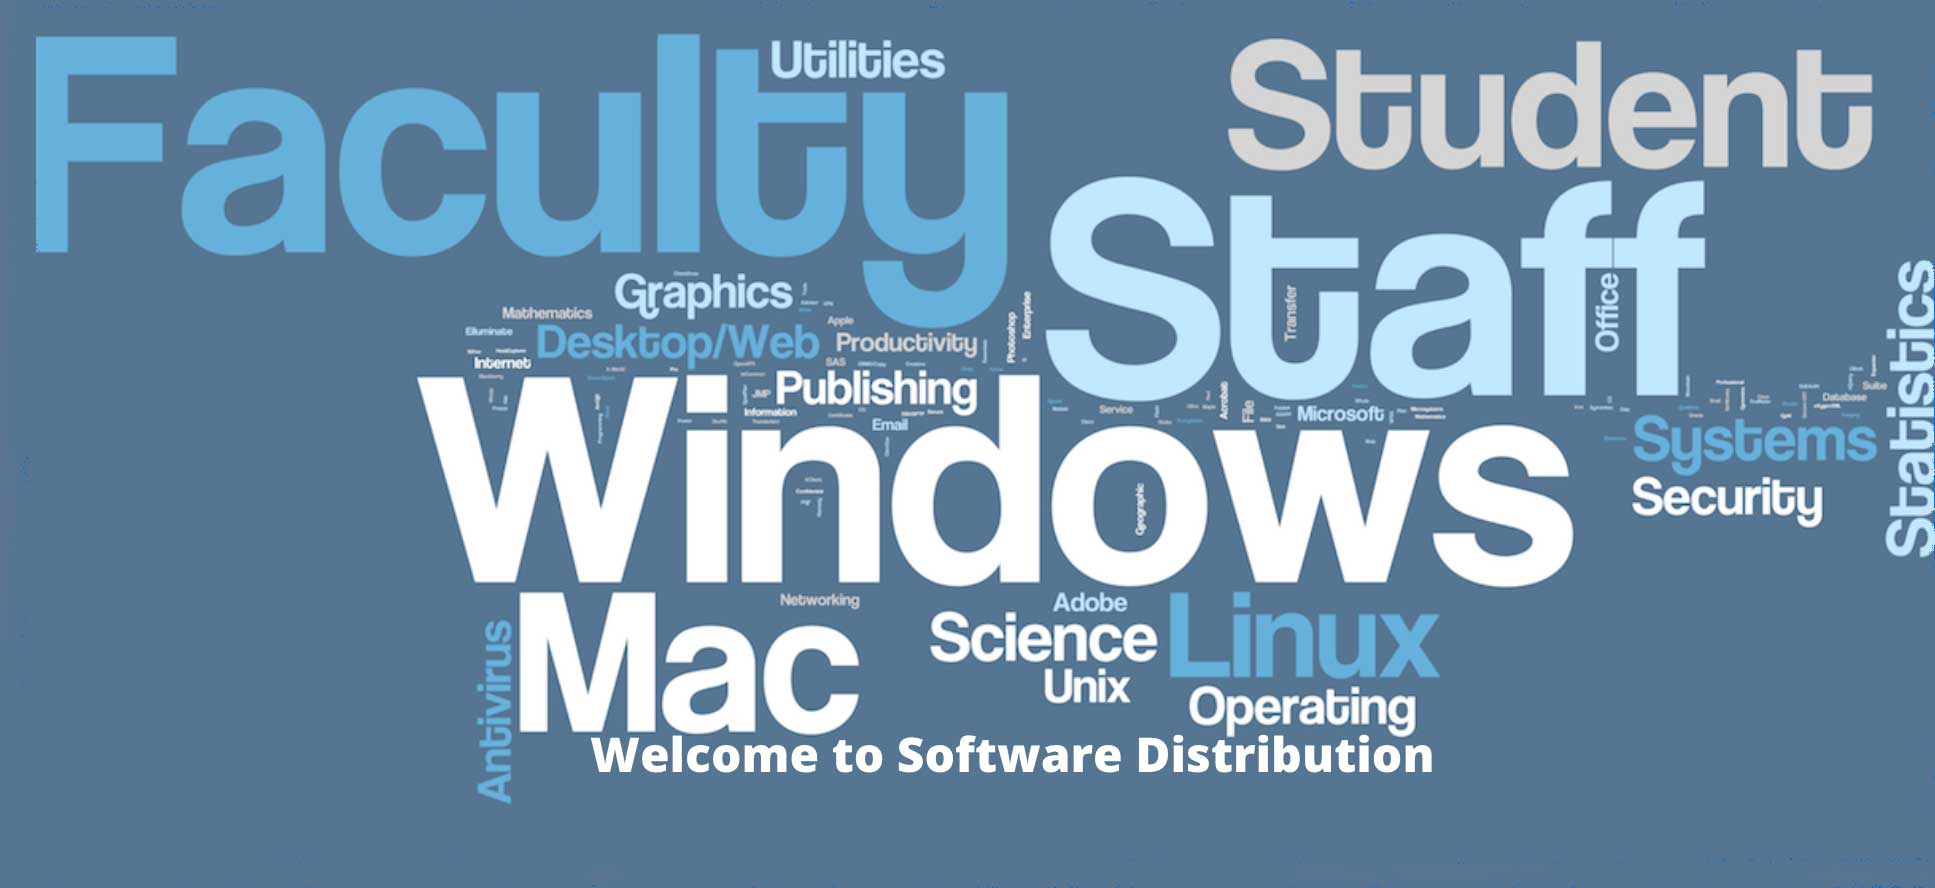 word cloud of featured software